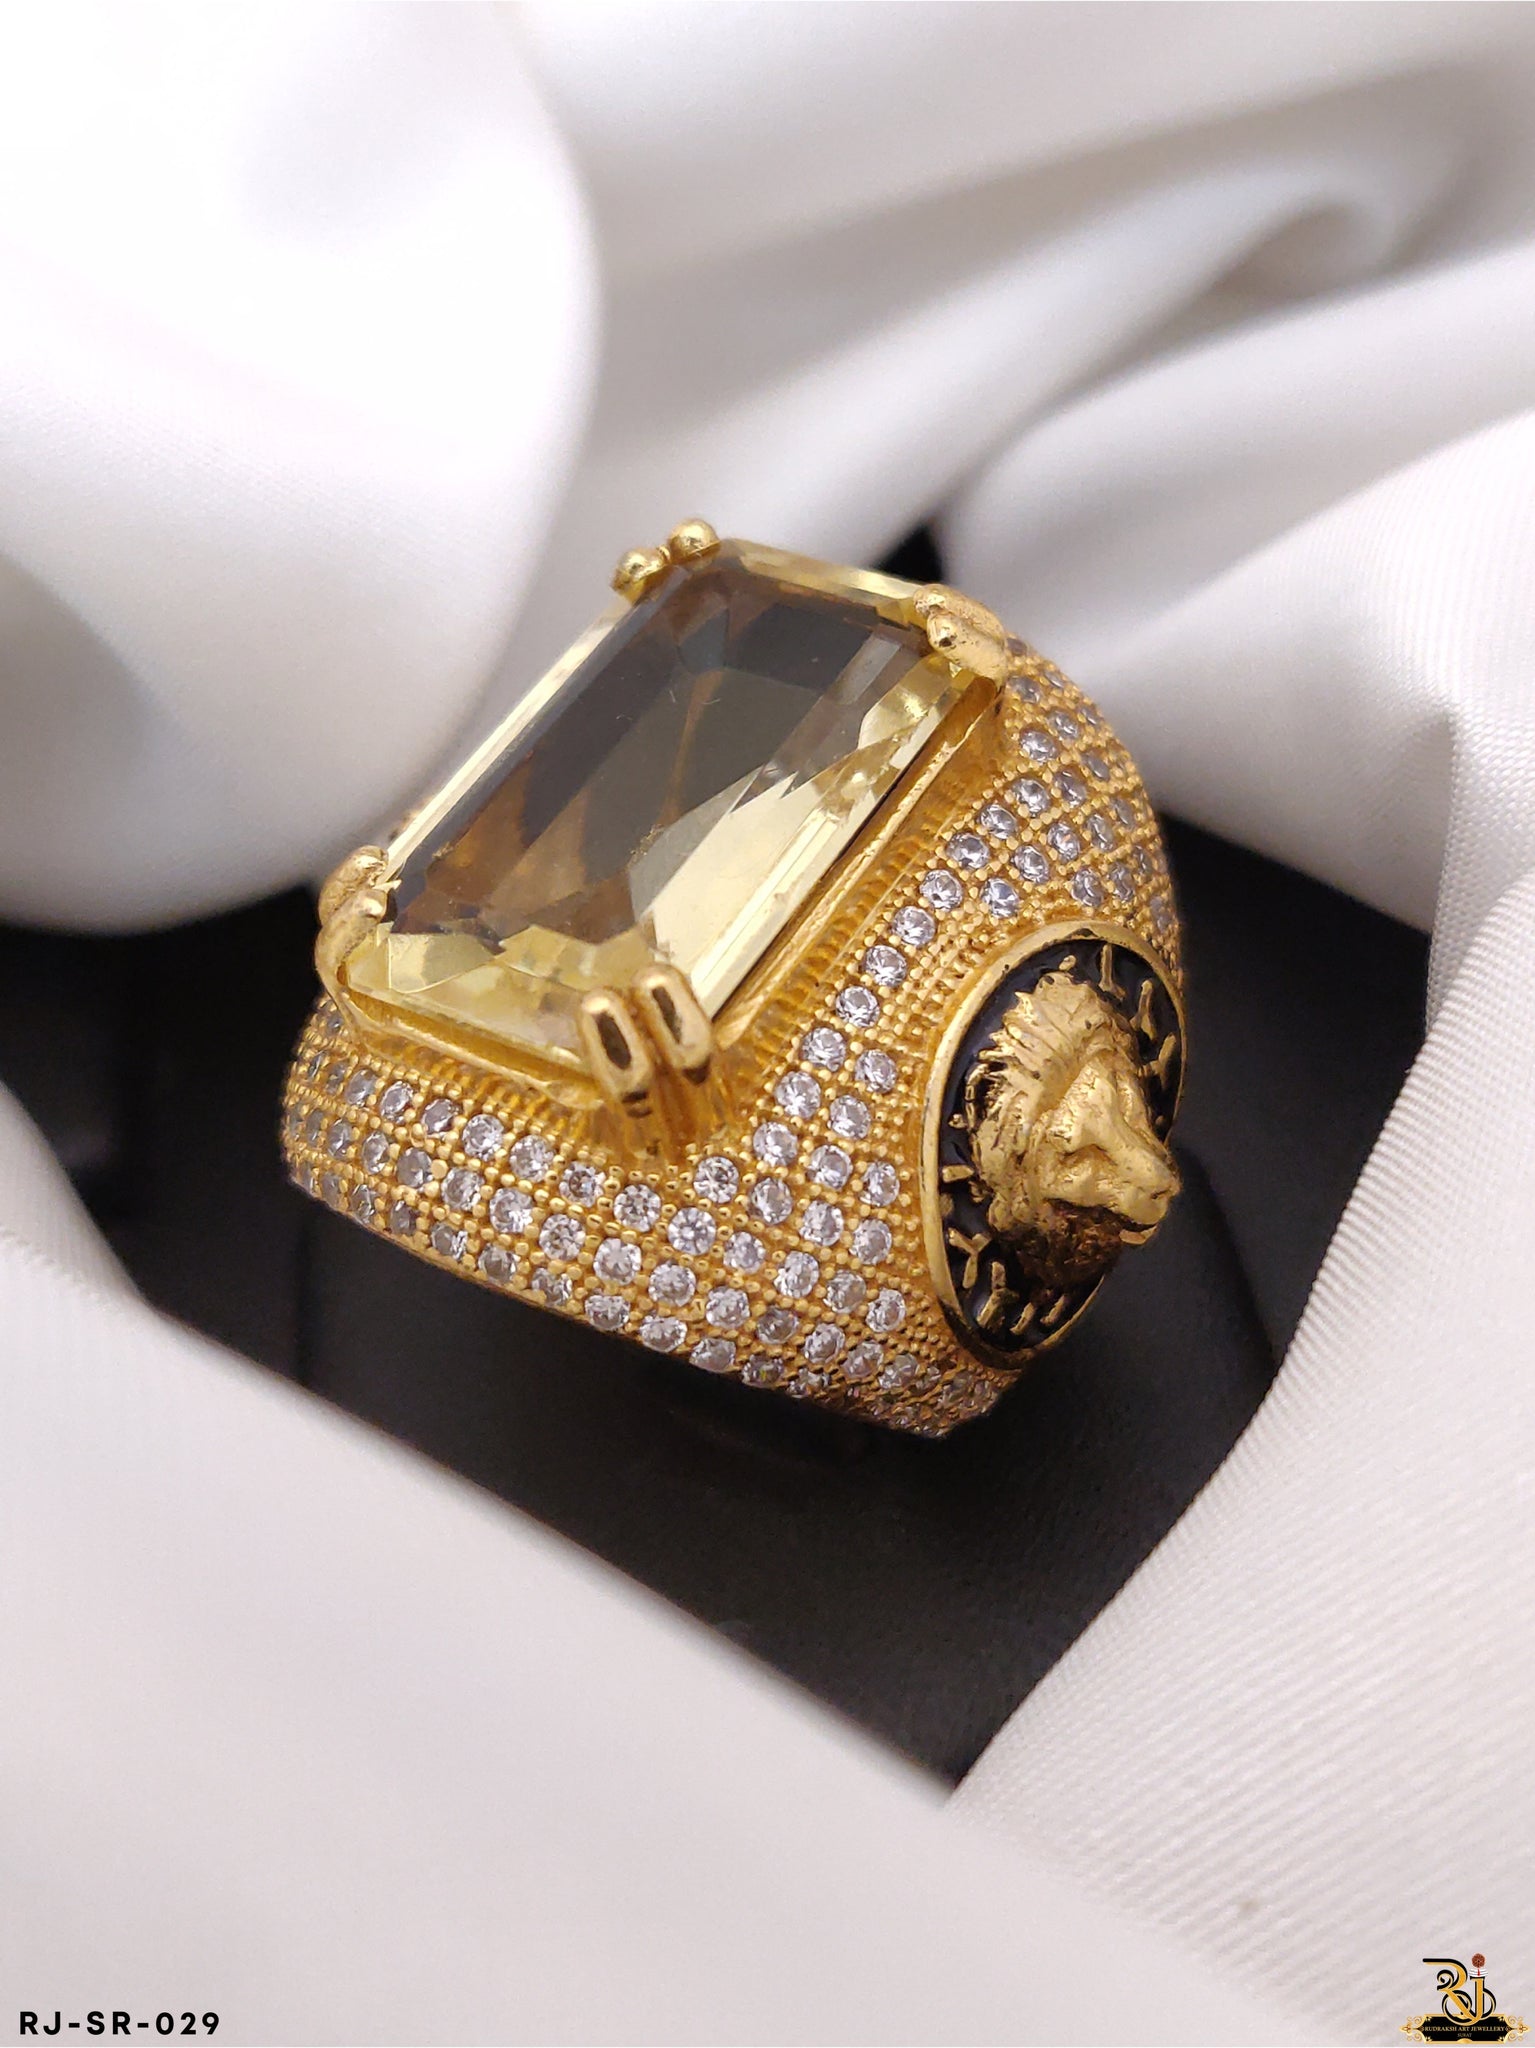 The Lion Ring in 22k Gold